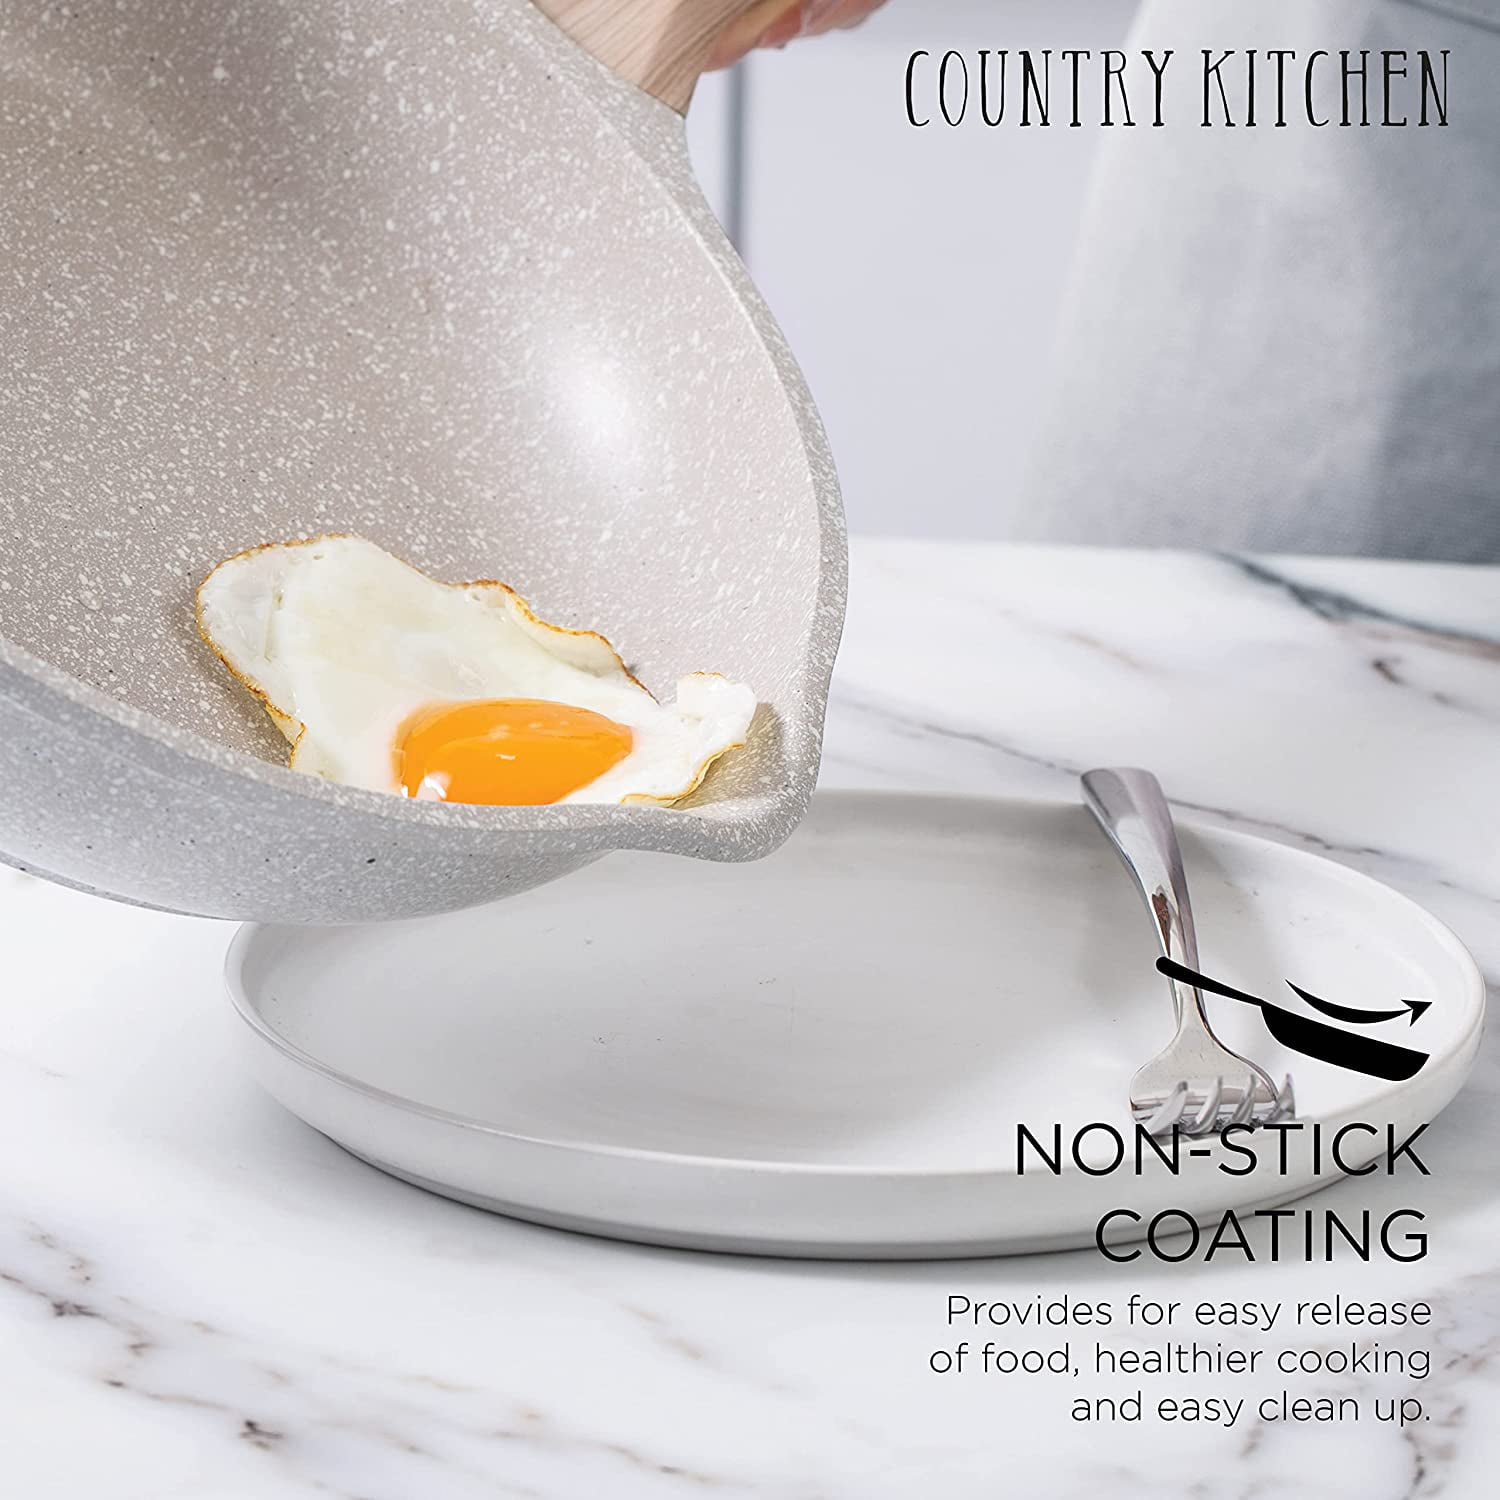  Country Kitchen Nonstick Cookware Sets - 6 Piece